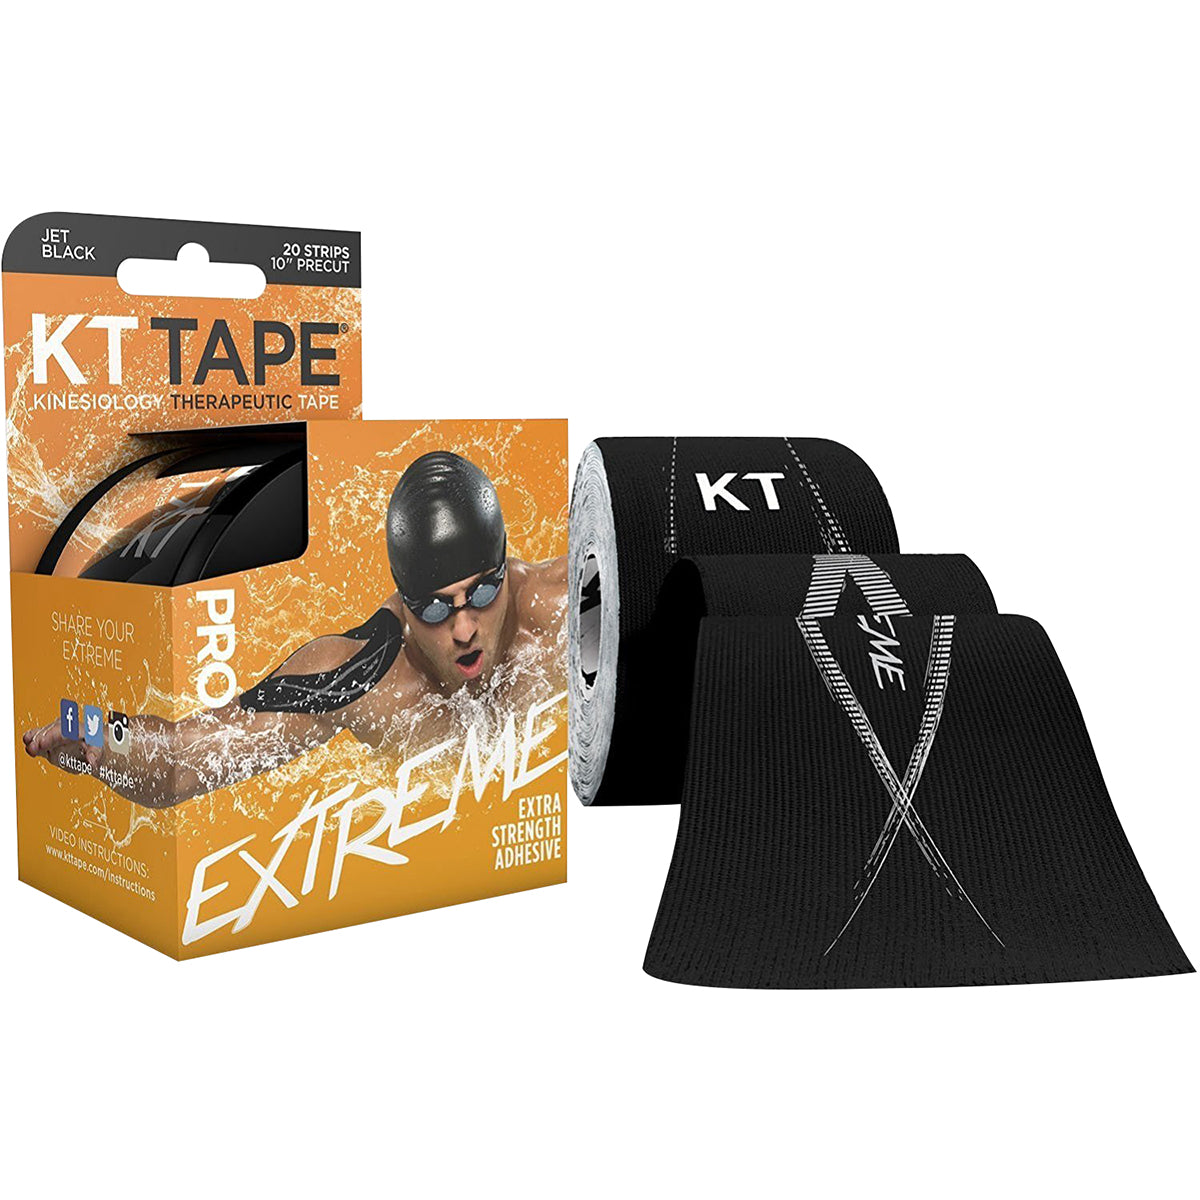 KT Tape Pro Extreme 10" Precut Kinesiology Therapeutic Sports Roll - 20 Strips KT Tape